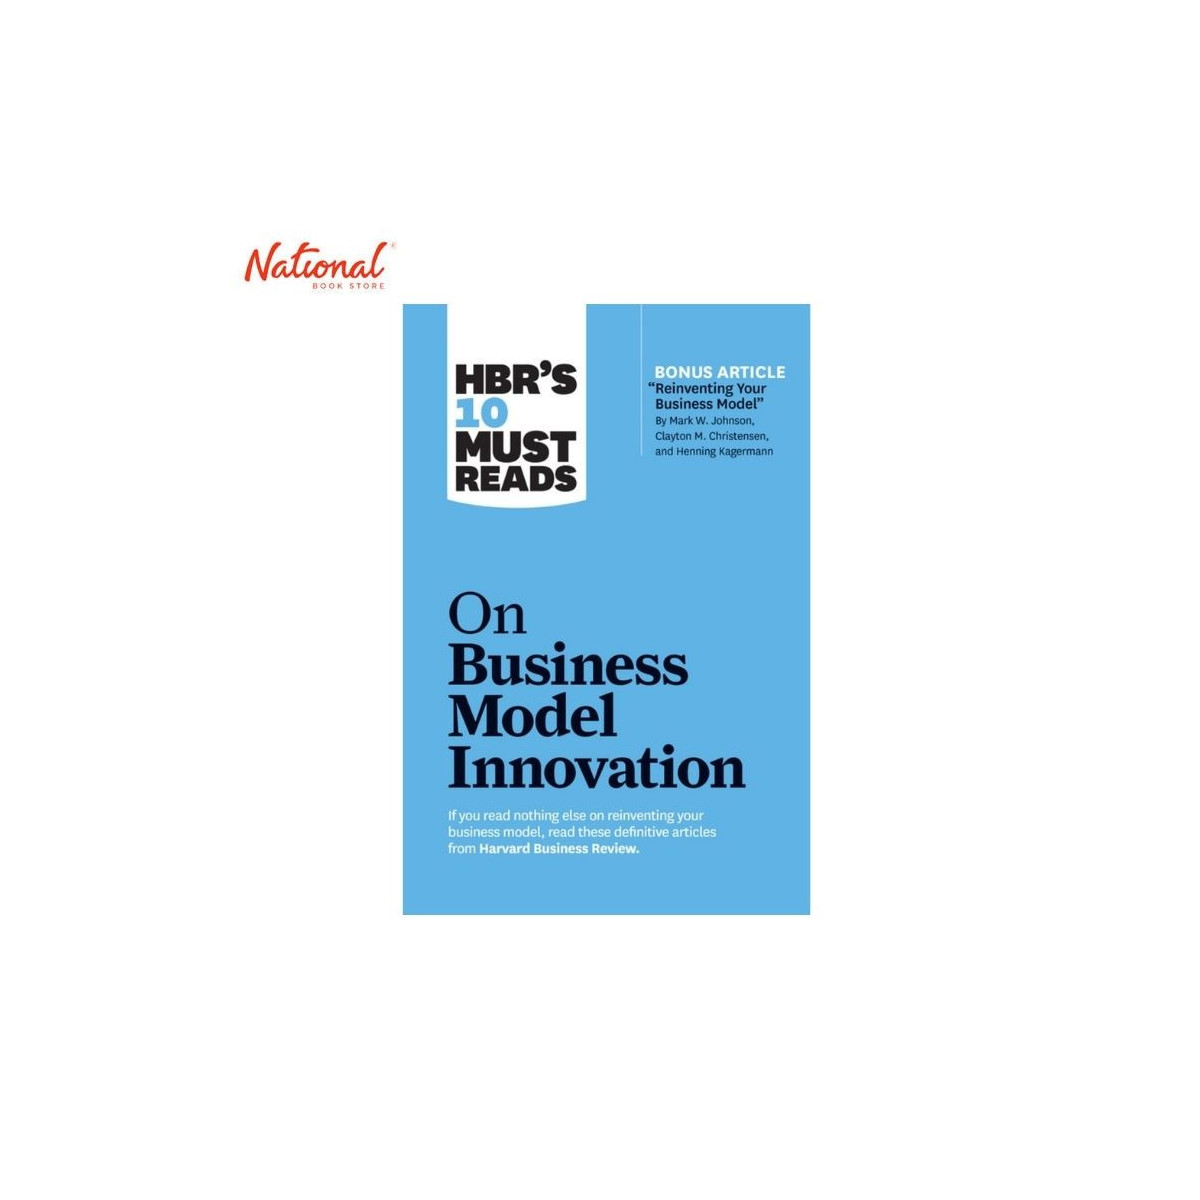 HBR's 10 Must Reads: On Business Model Innovation Trade Paperback by Harvard Business Review